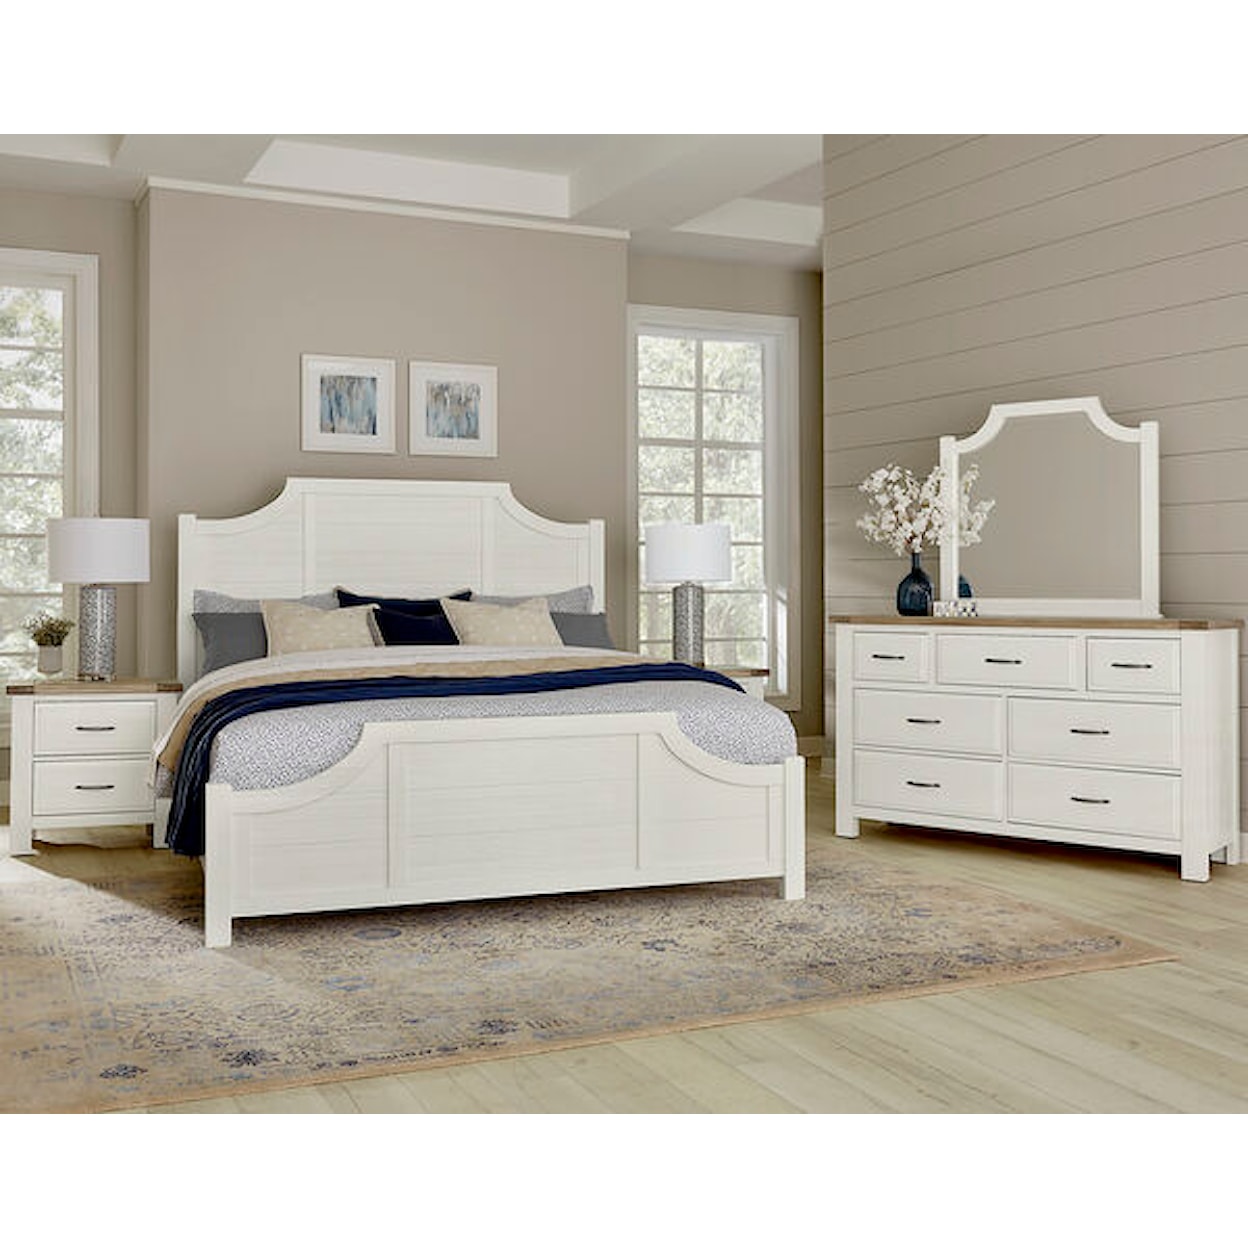 Artisan & Post Maple Road Scalloped Queen Bed